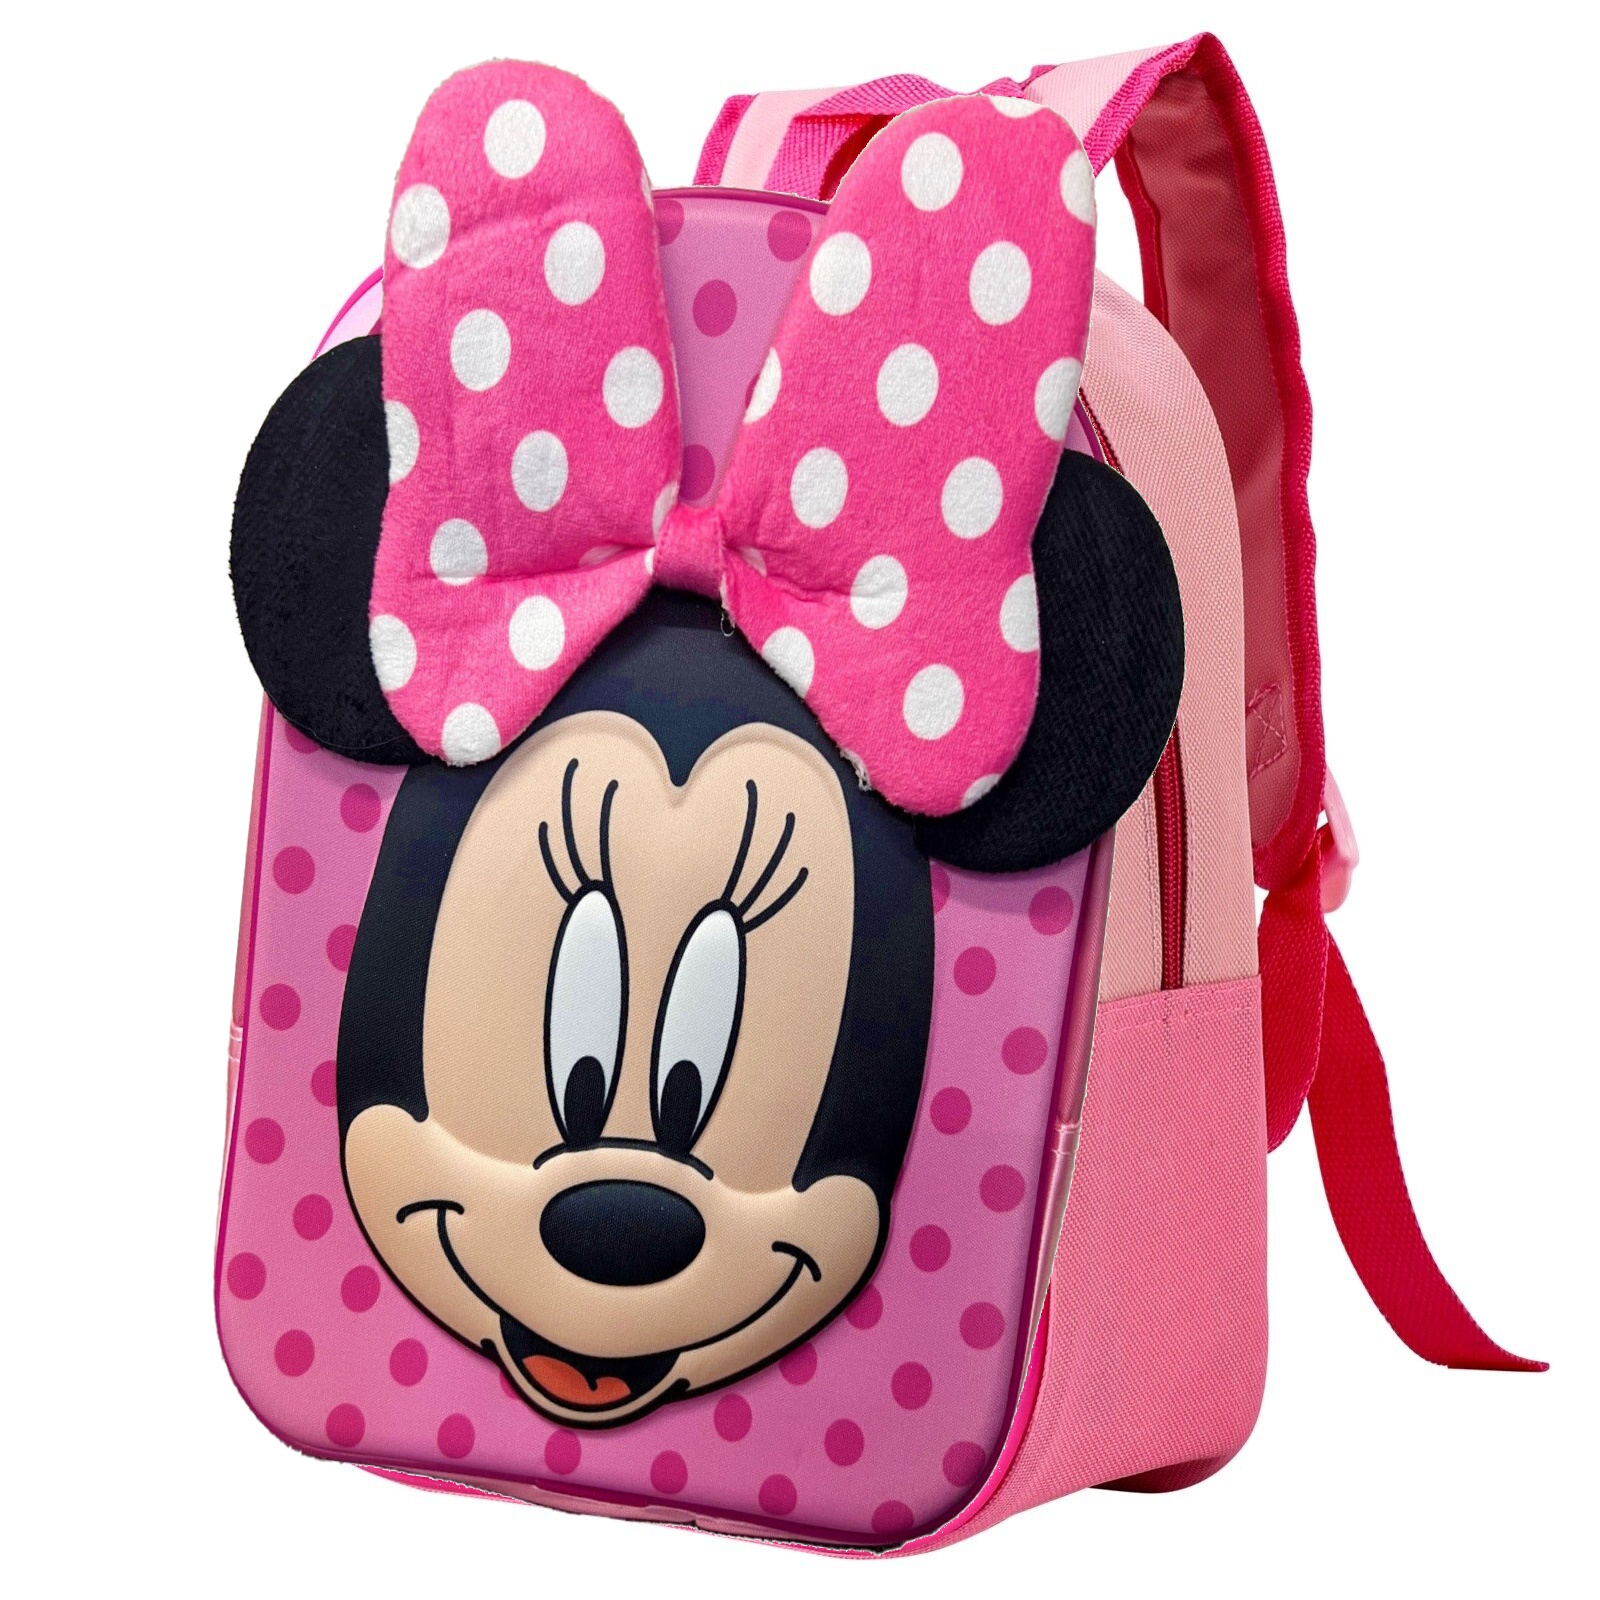 https://www.quickdrawsupplies.com/wp-content/uploads/2022/08/minnie-mouse-backpack-with-ears.jpg